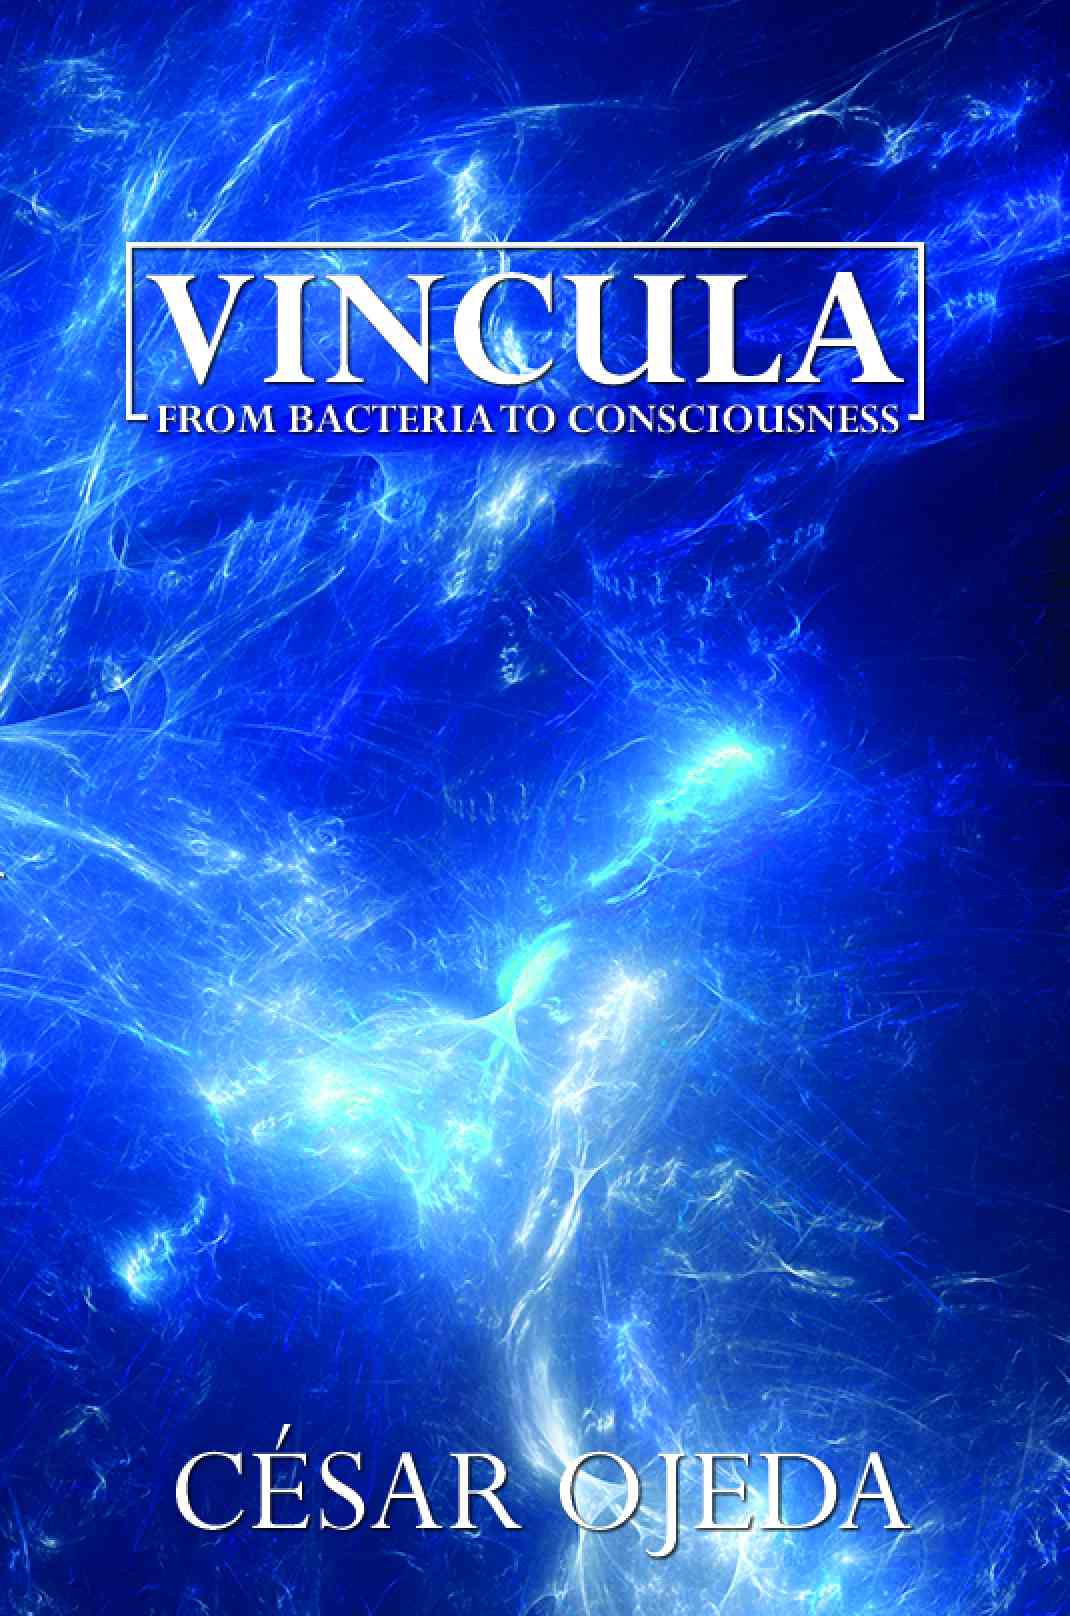 Vincula by Cesar Ojeda was featured in the Author Interview of a YouTube Channel